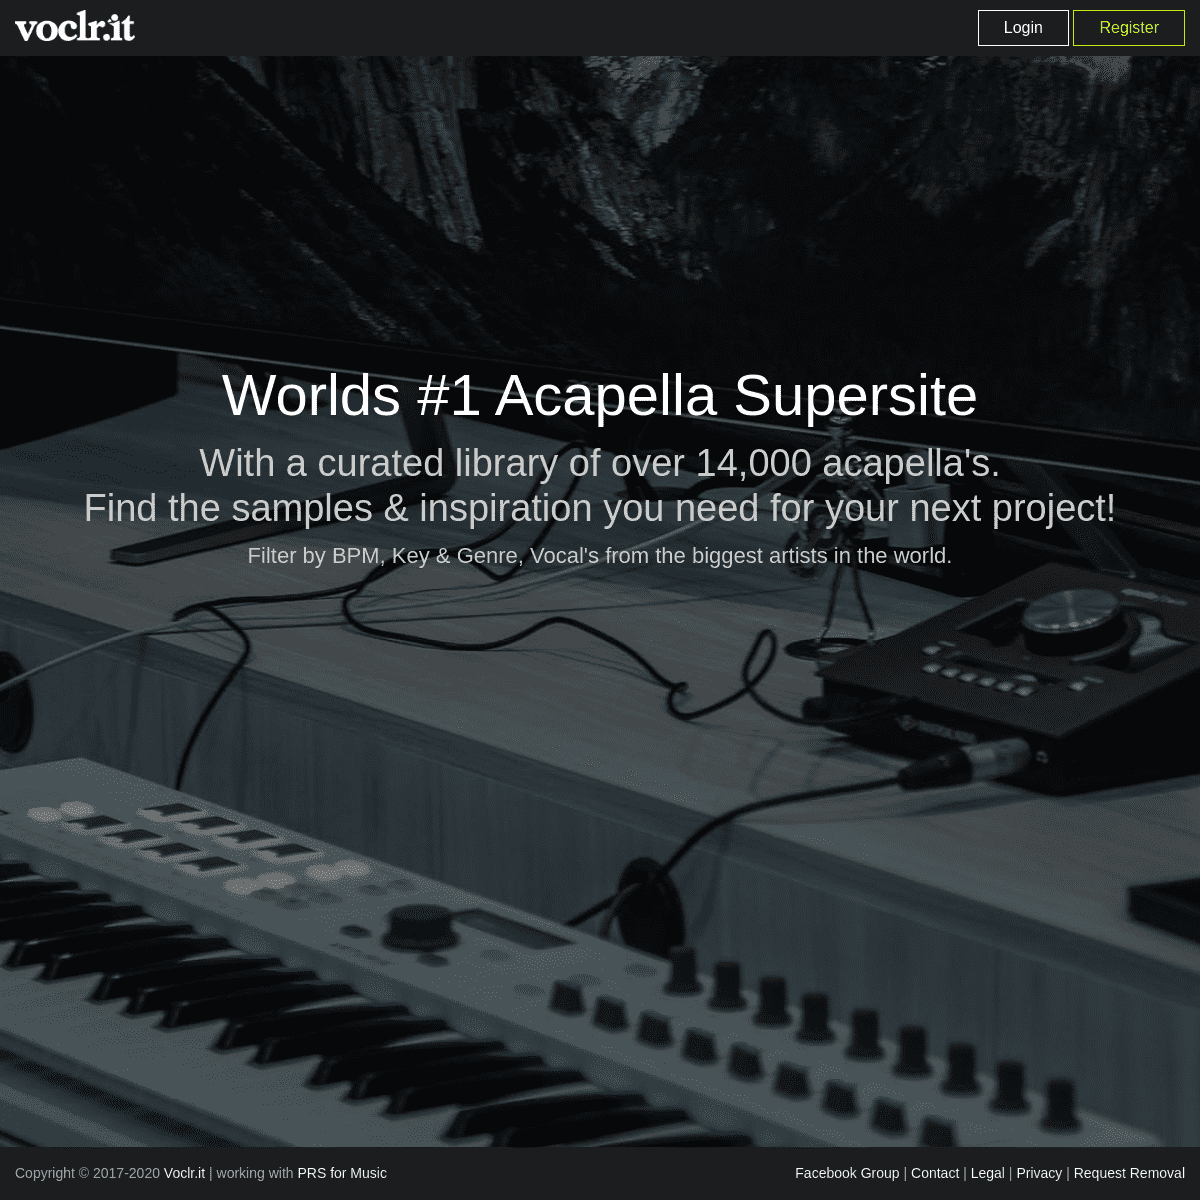 Free Studio Acapellas for Music Producers & Sound Engineers